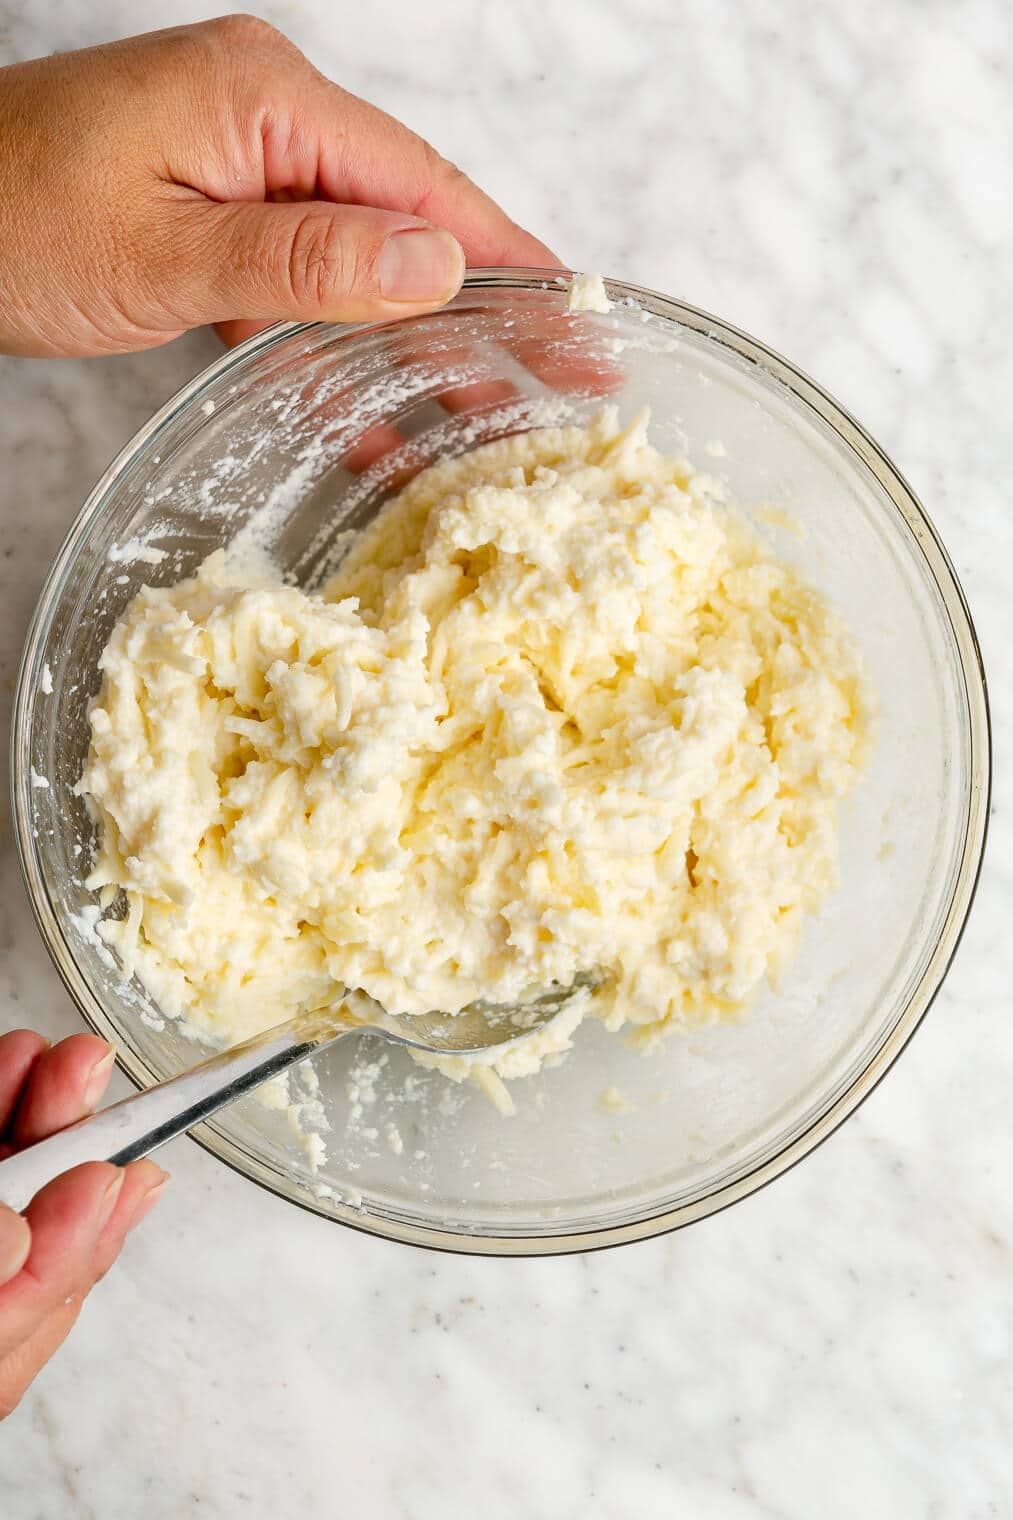 A person stirring together ricotta and mozzarella in a glass bowl.